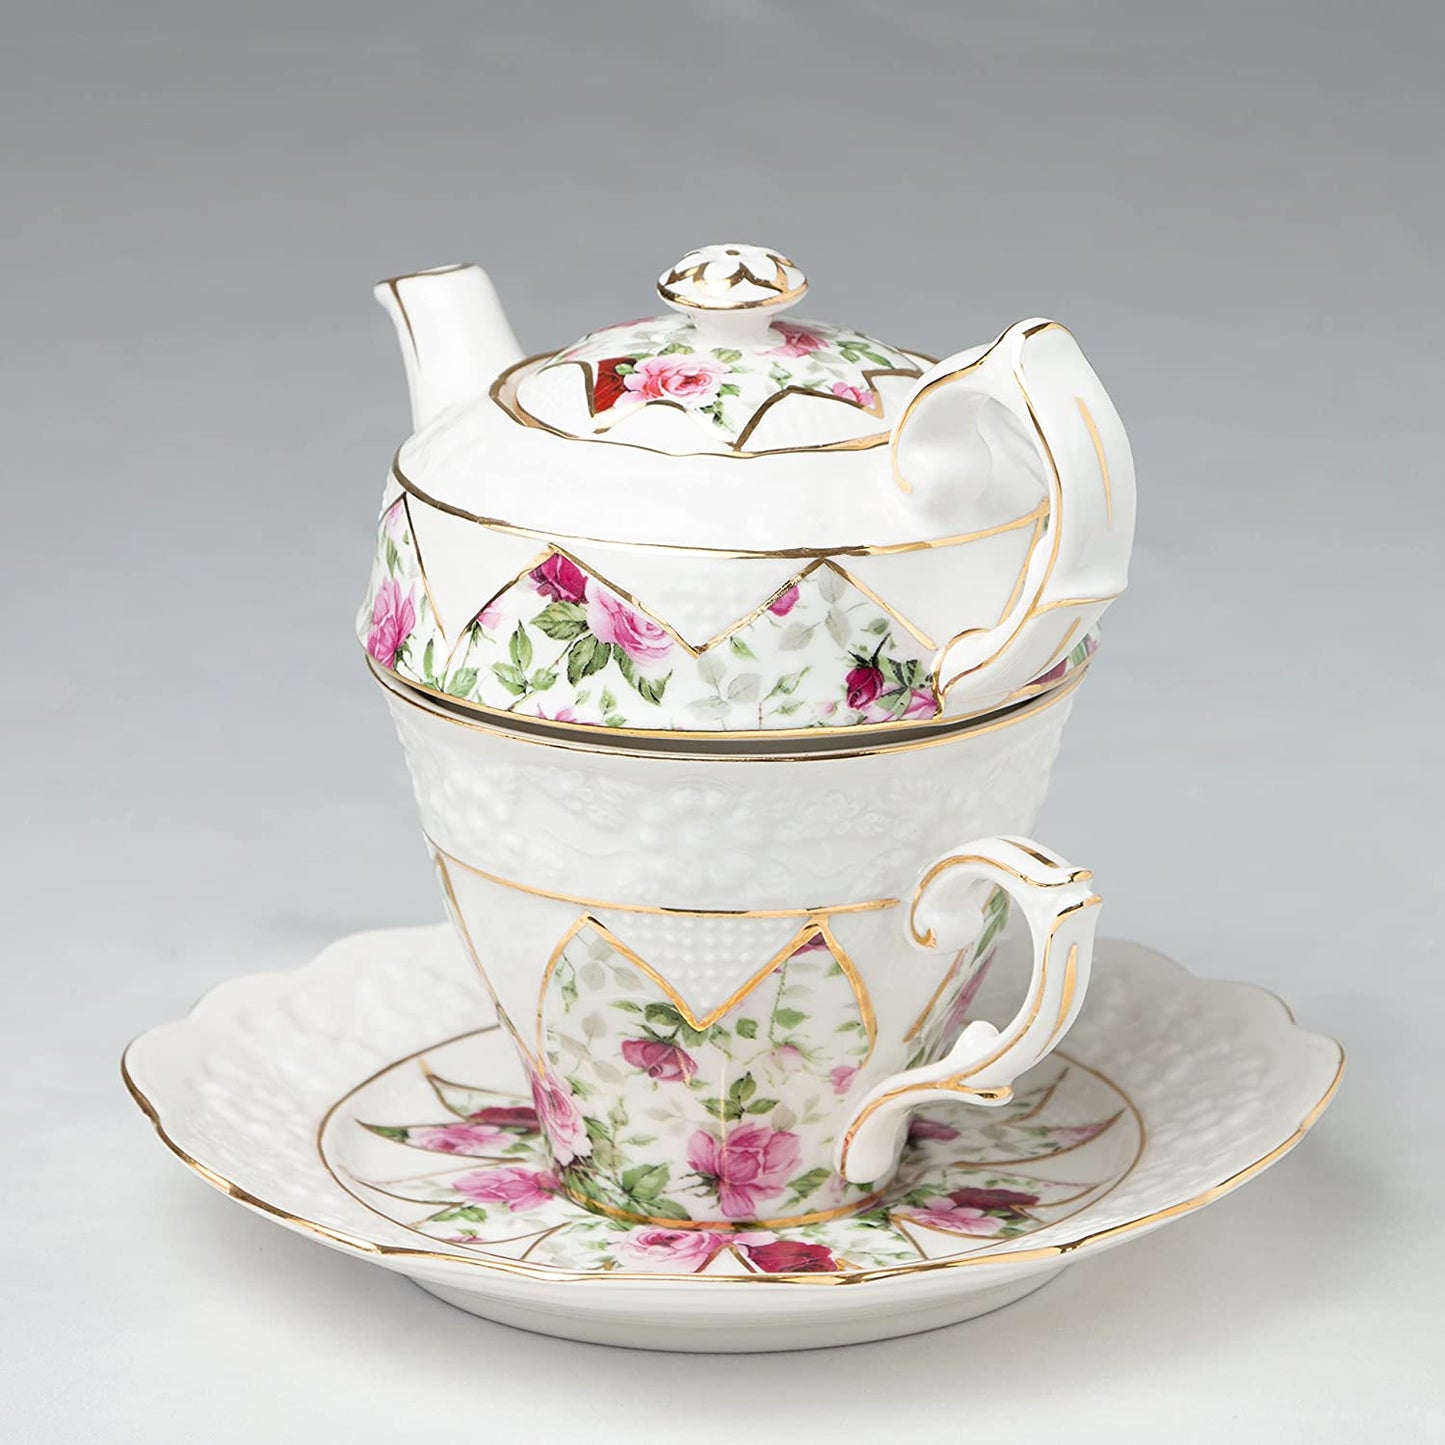 Gracie China by Coastline Imports 4-Piece Porcelain Tea for One, Stacked Teapot Cup Saucer, Red Rose